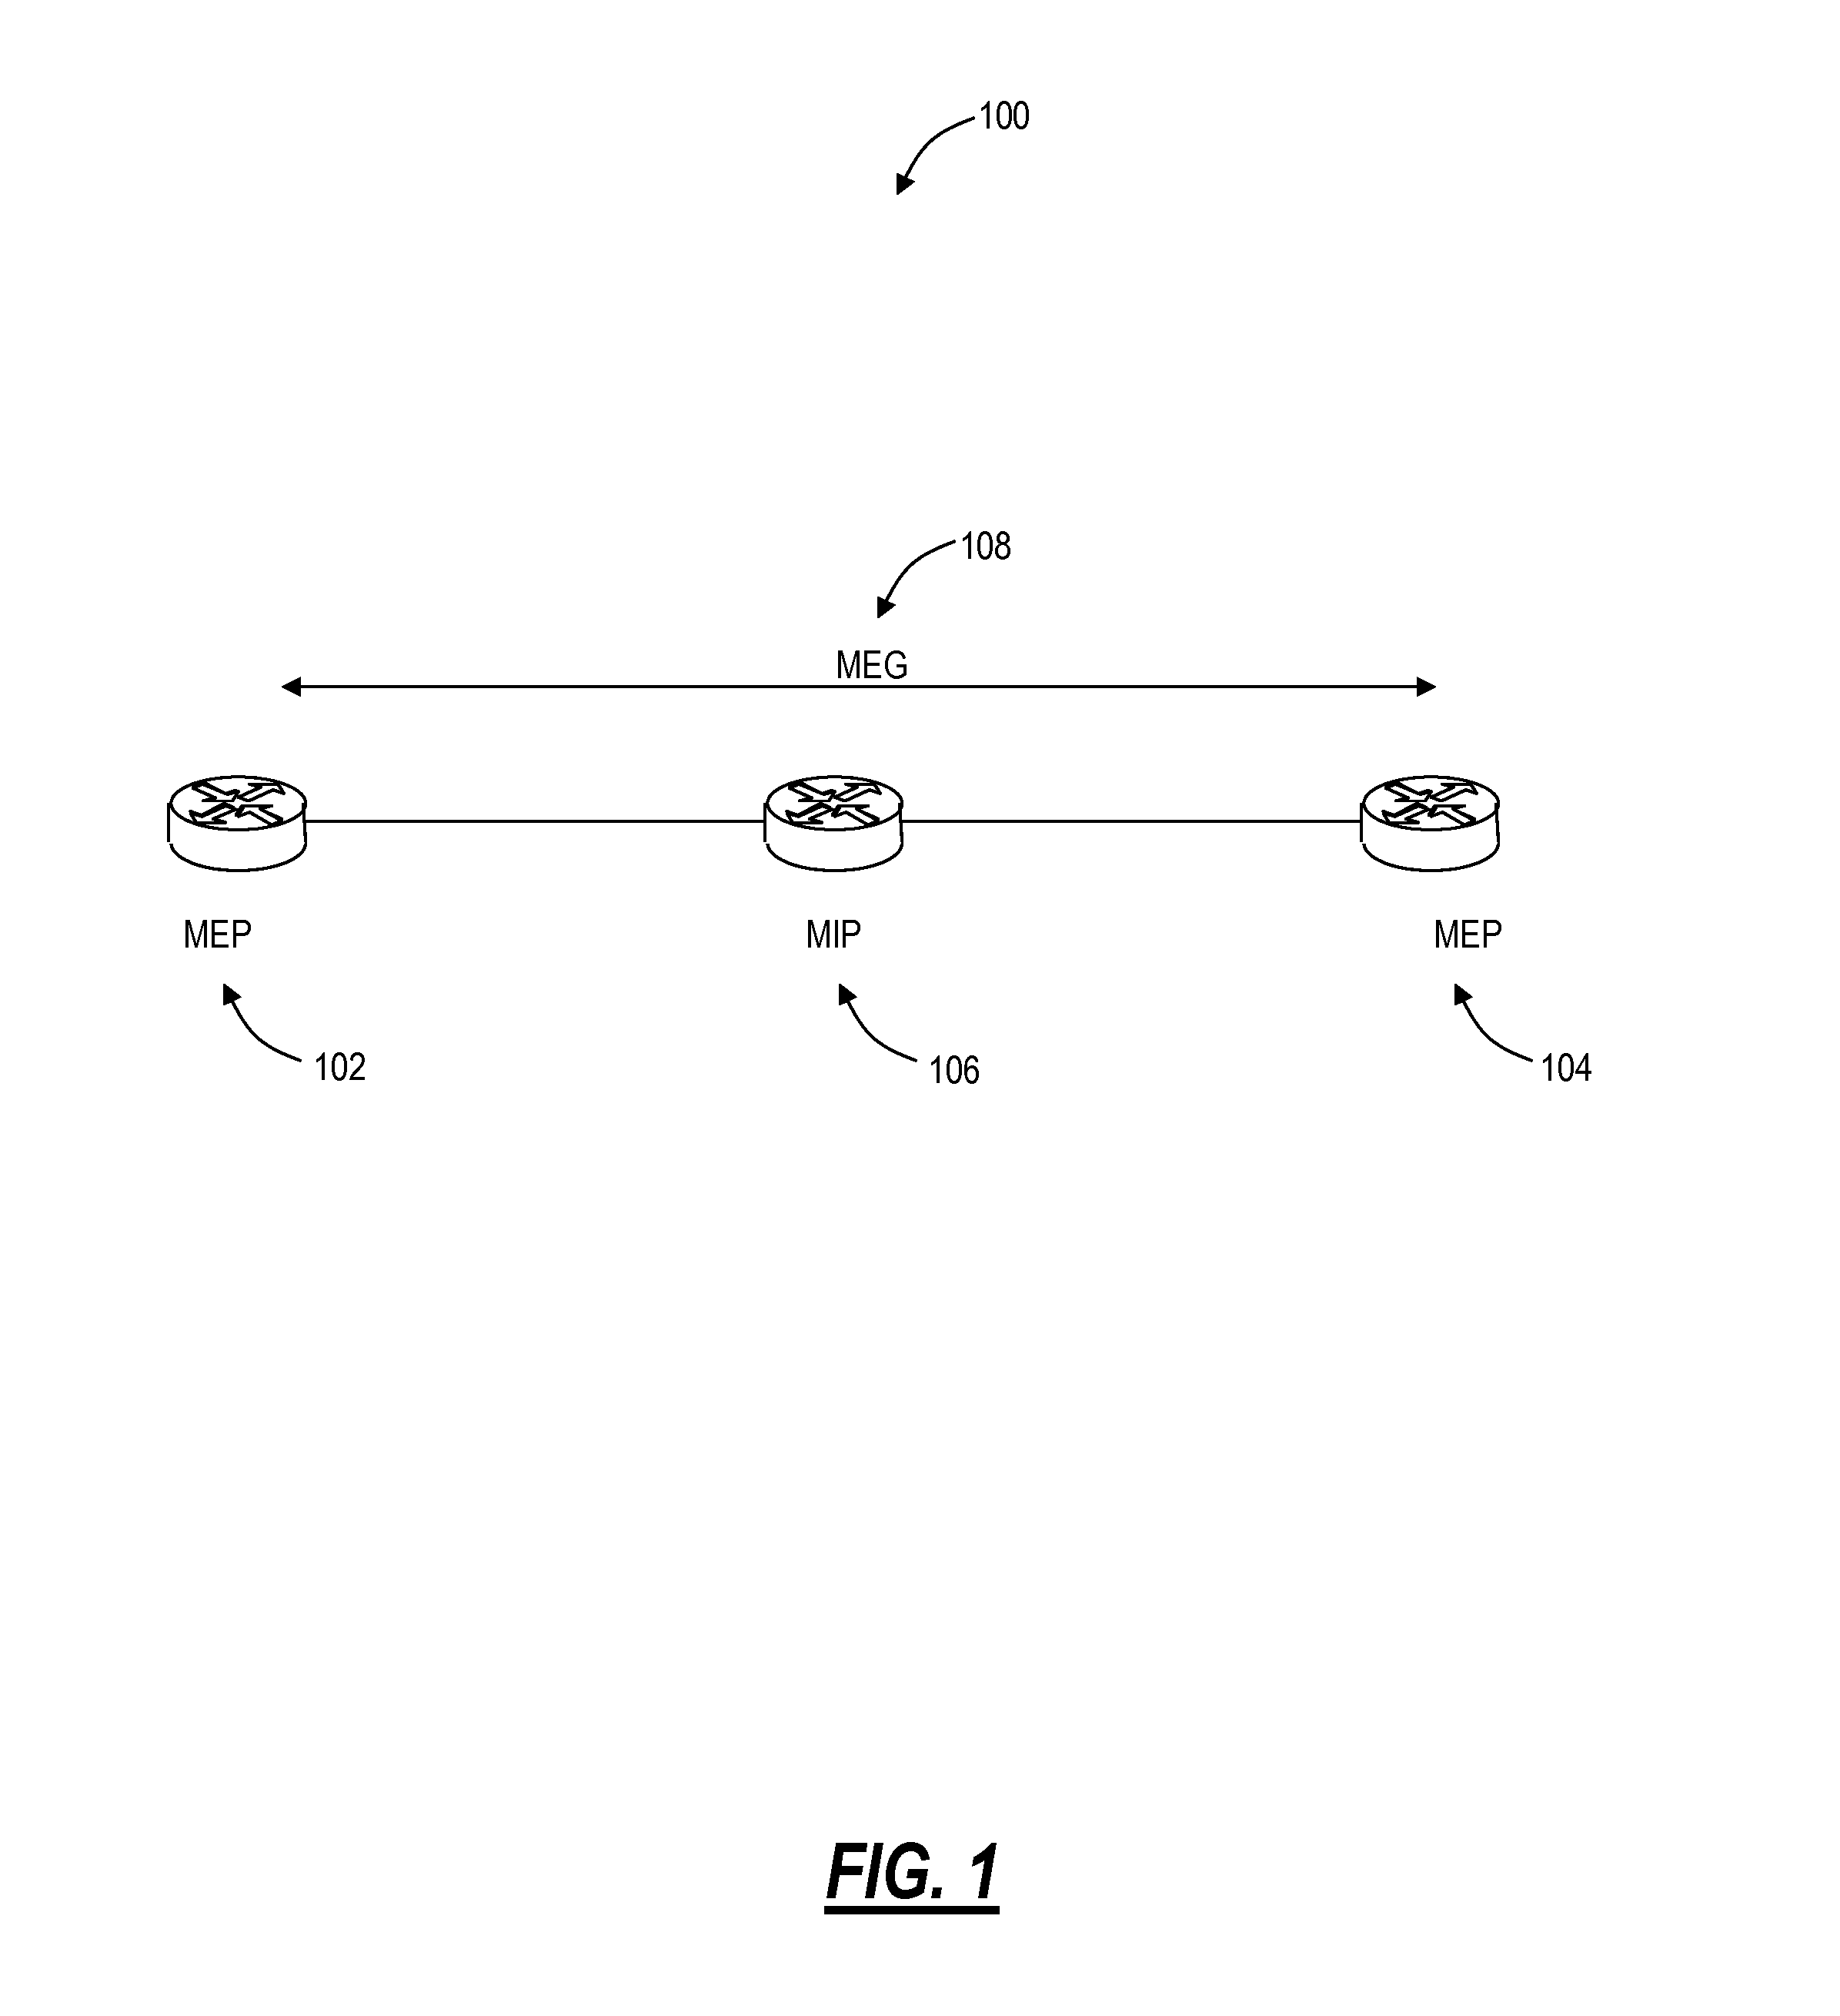 Ethernet fault management systems and methods